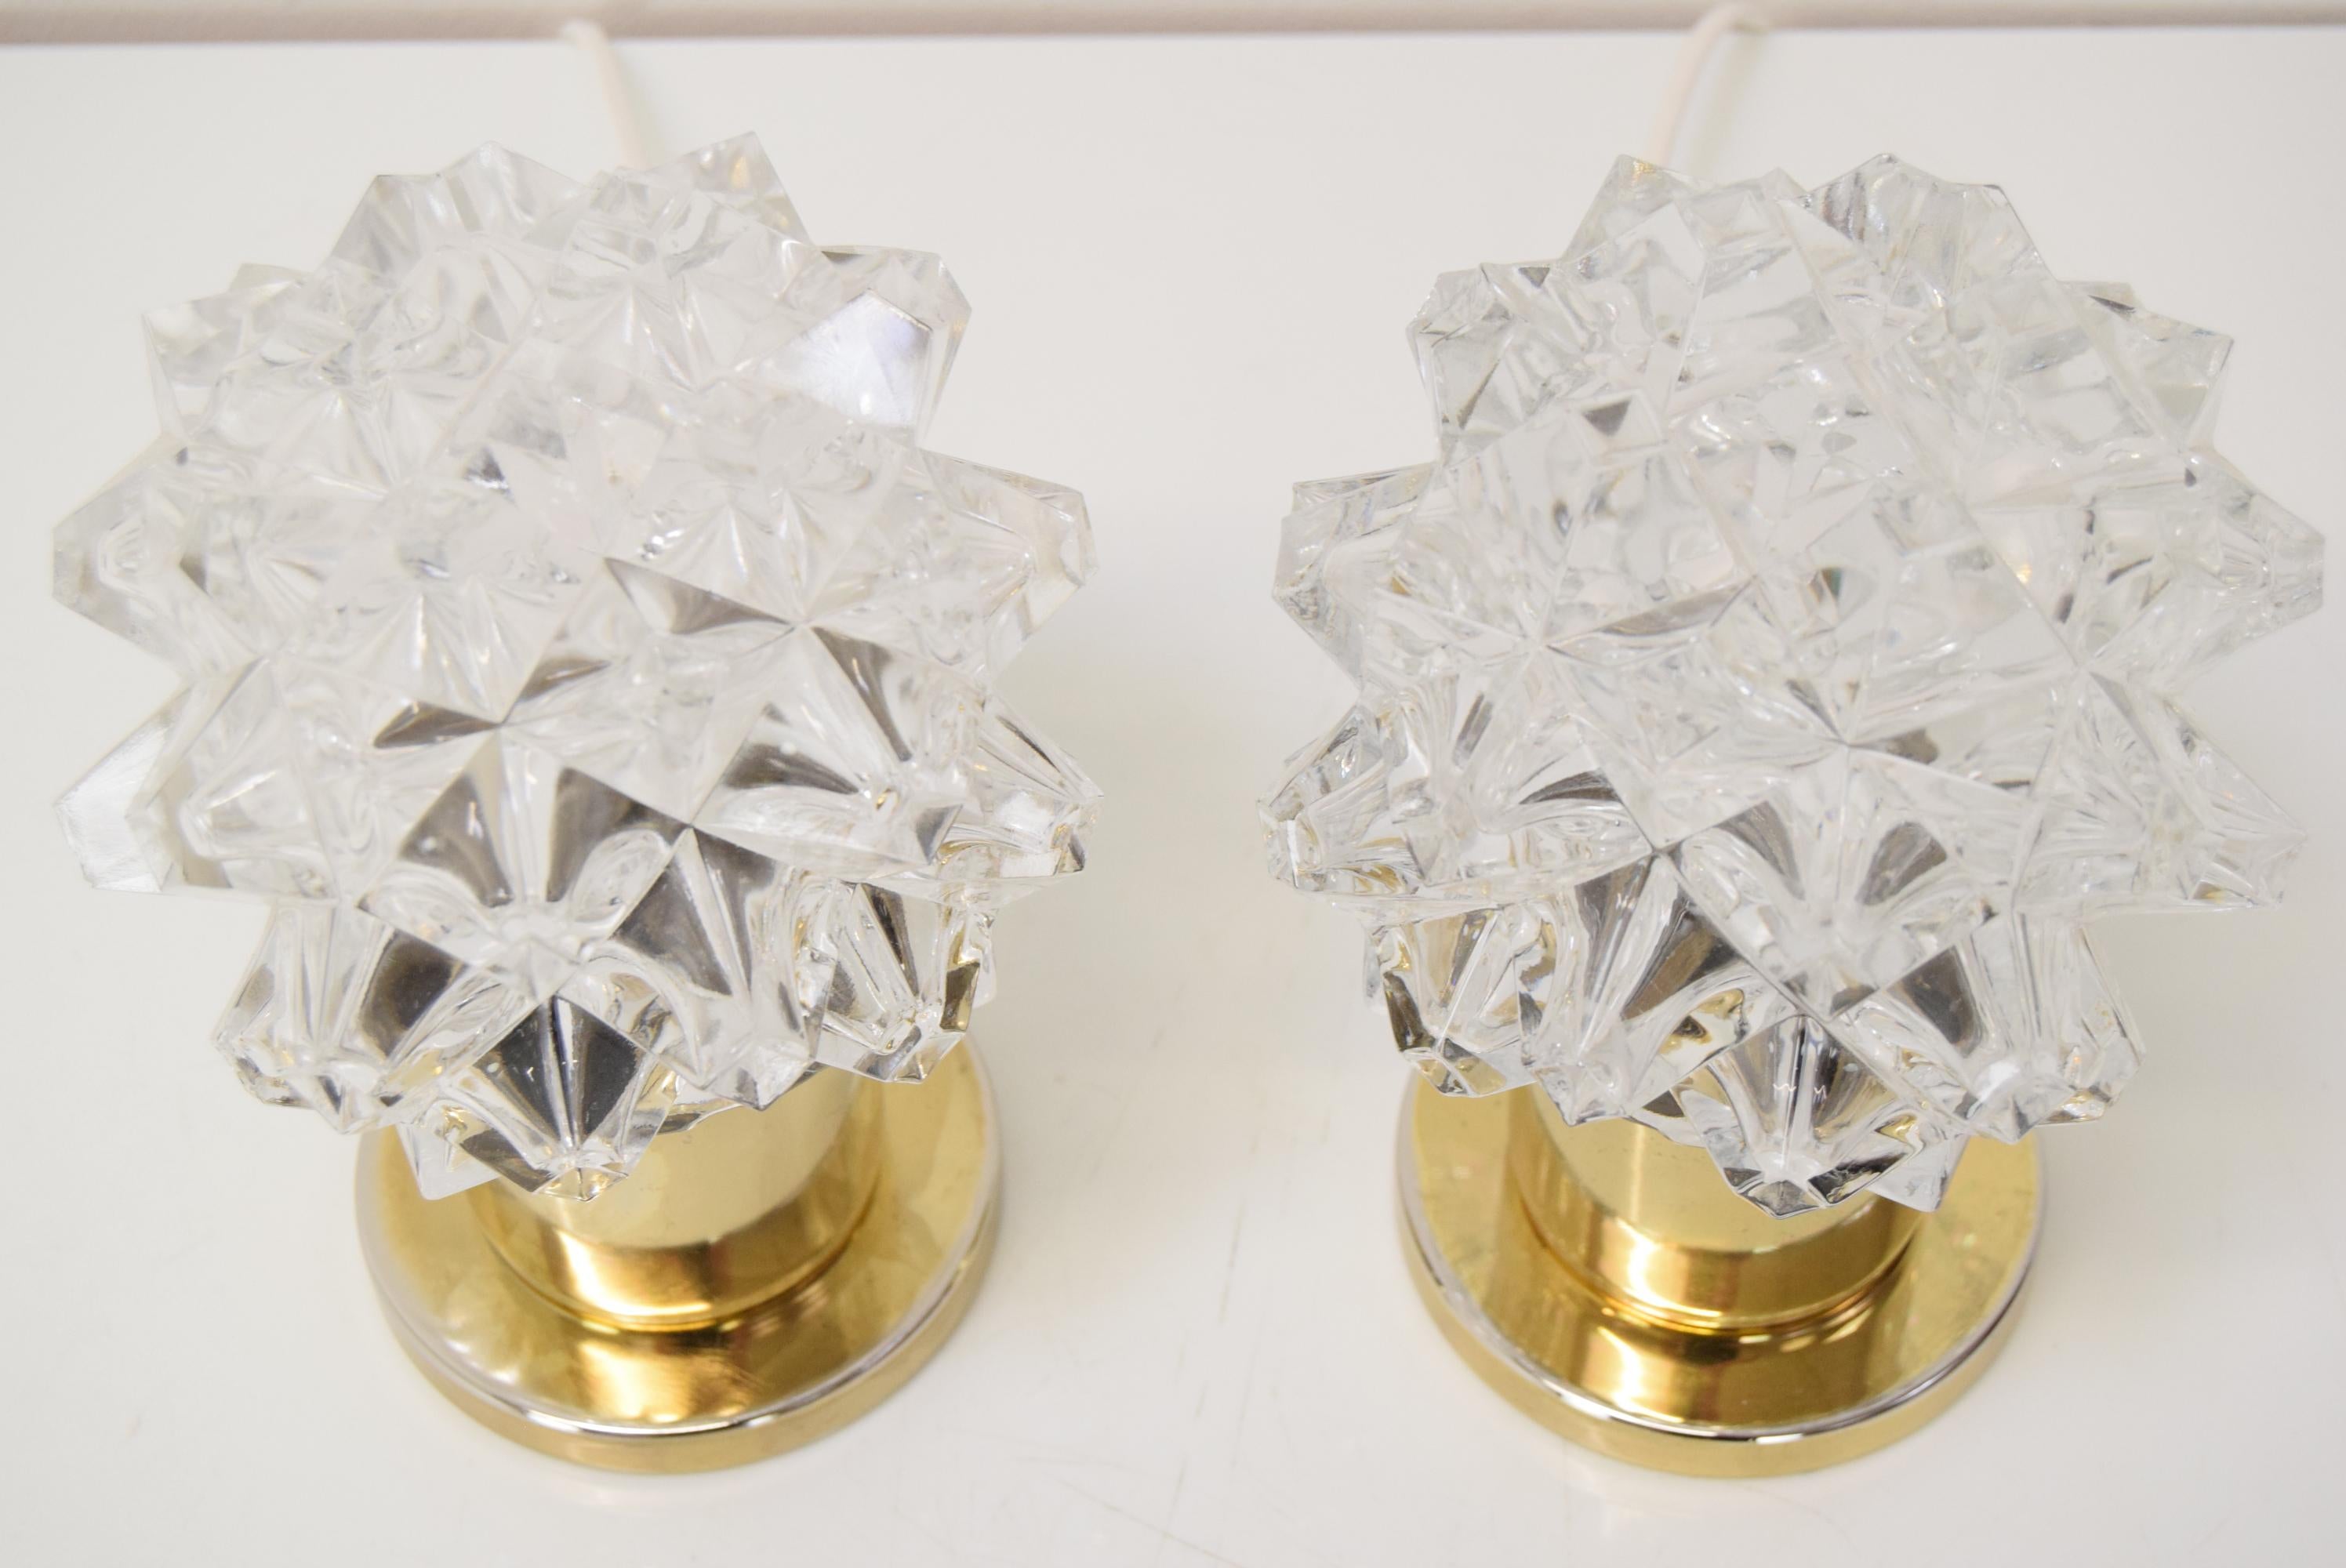 Czech Pair of Design Table or Wall Lamps by Preciosa, Kamenicky Senov, 1960's. For Sale